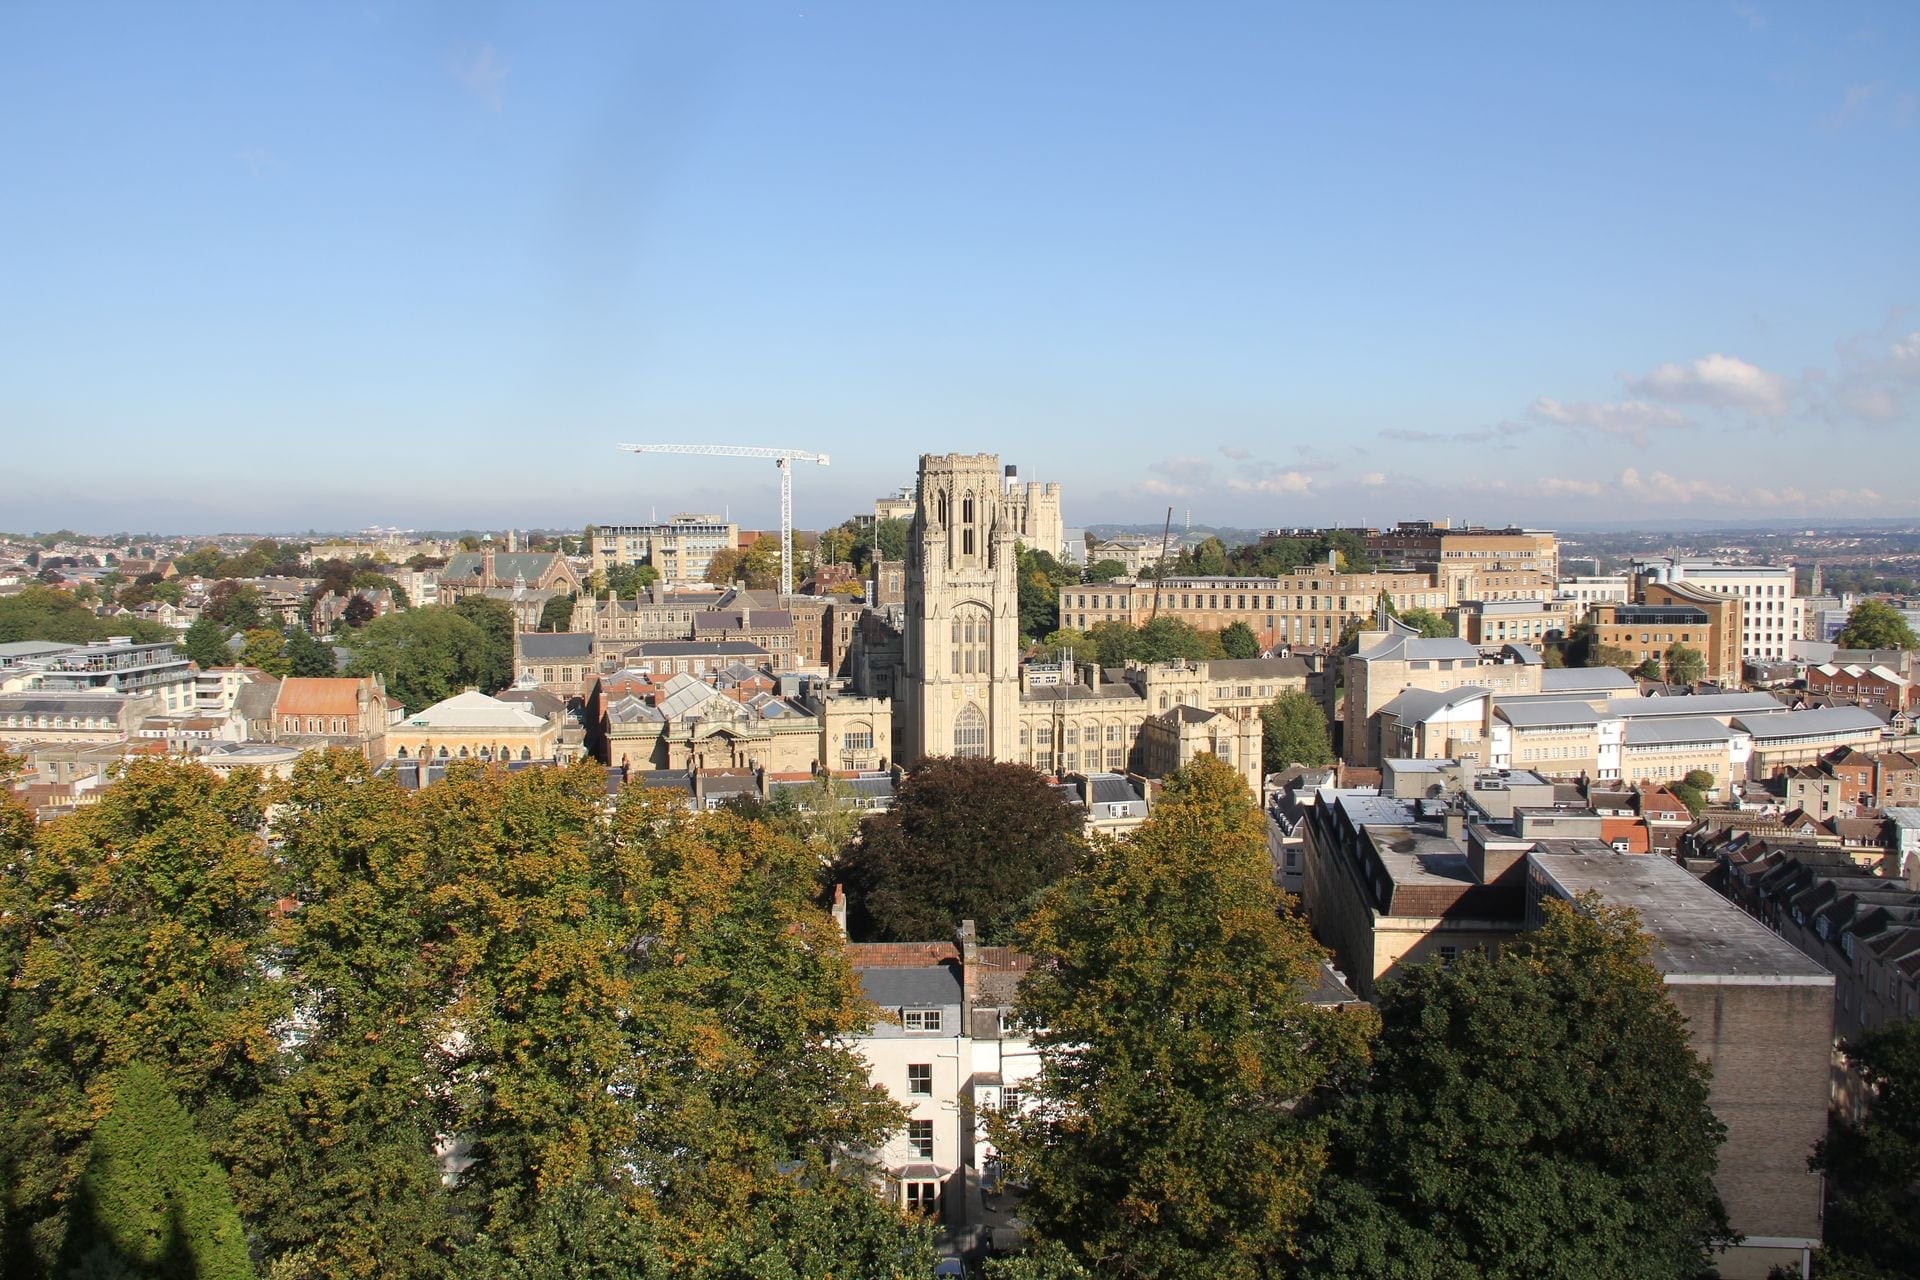 Bristol University from Cabot Tower